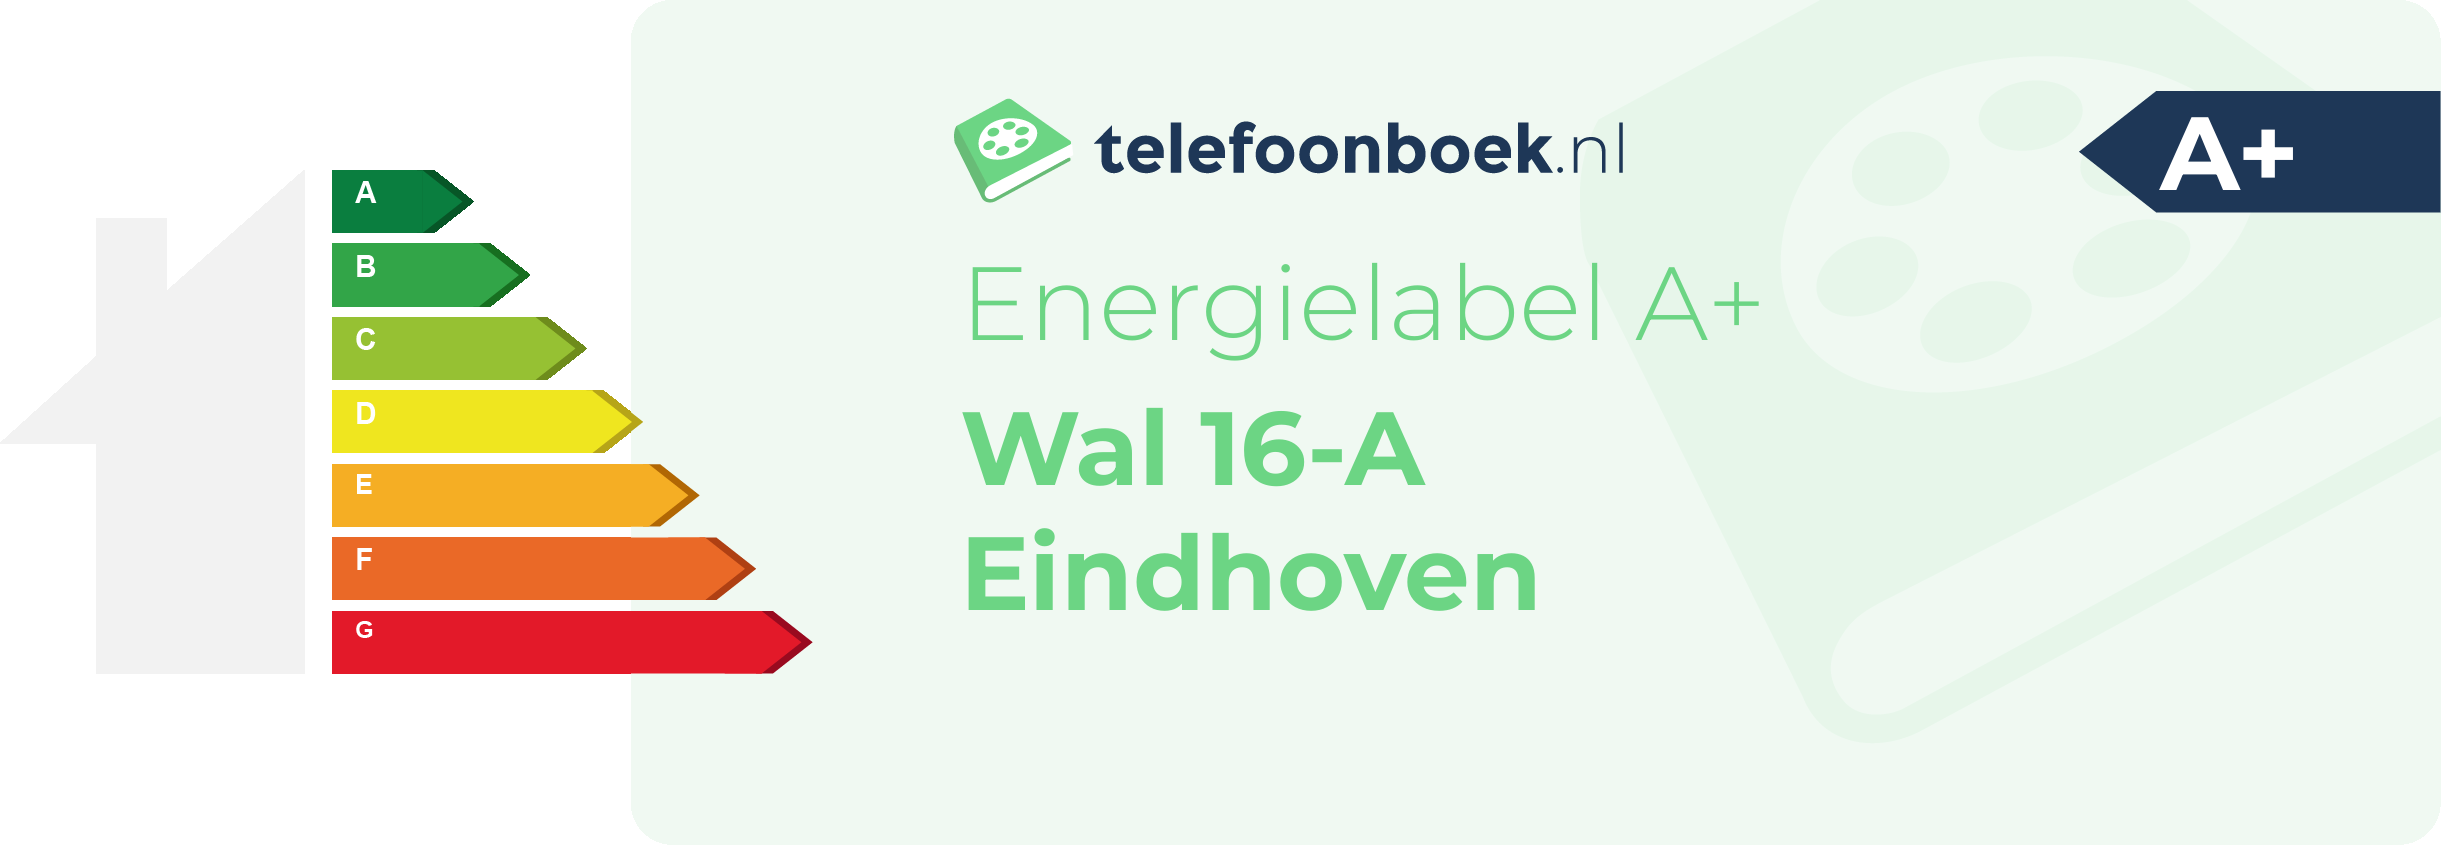 Energielabel Wal 16-A Eindhoven